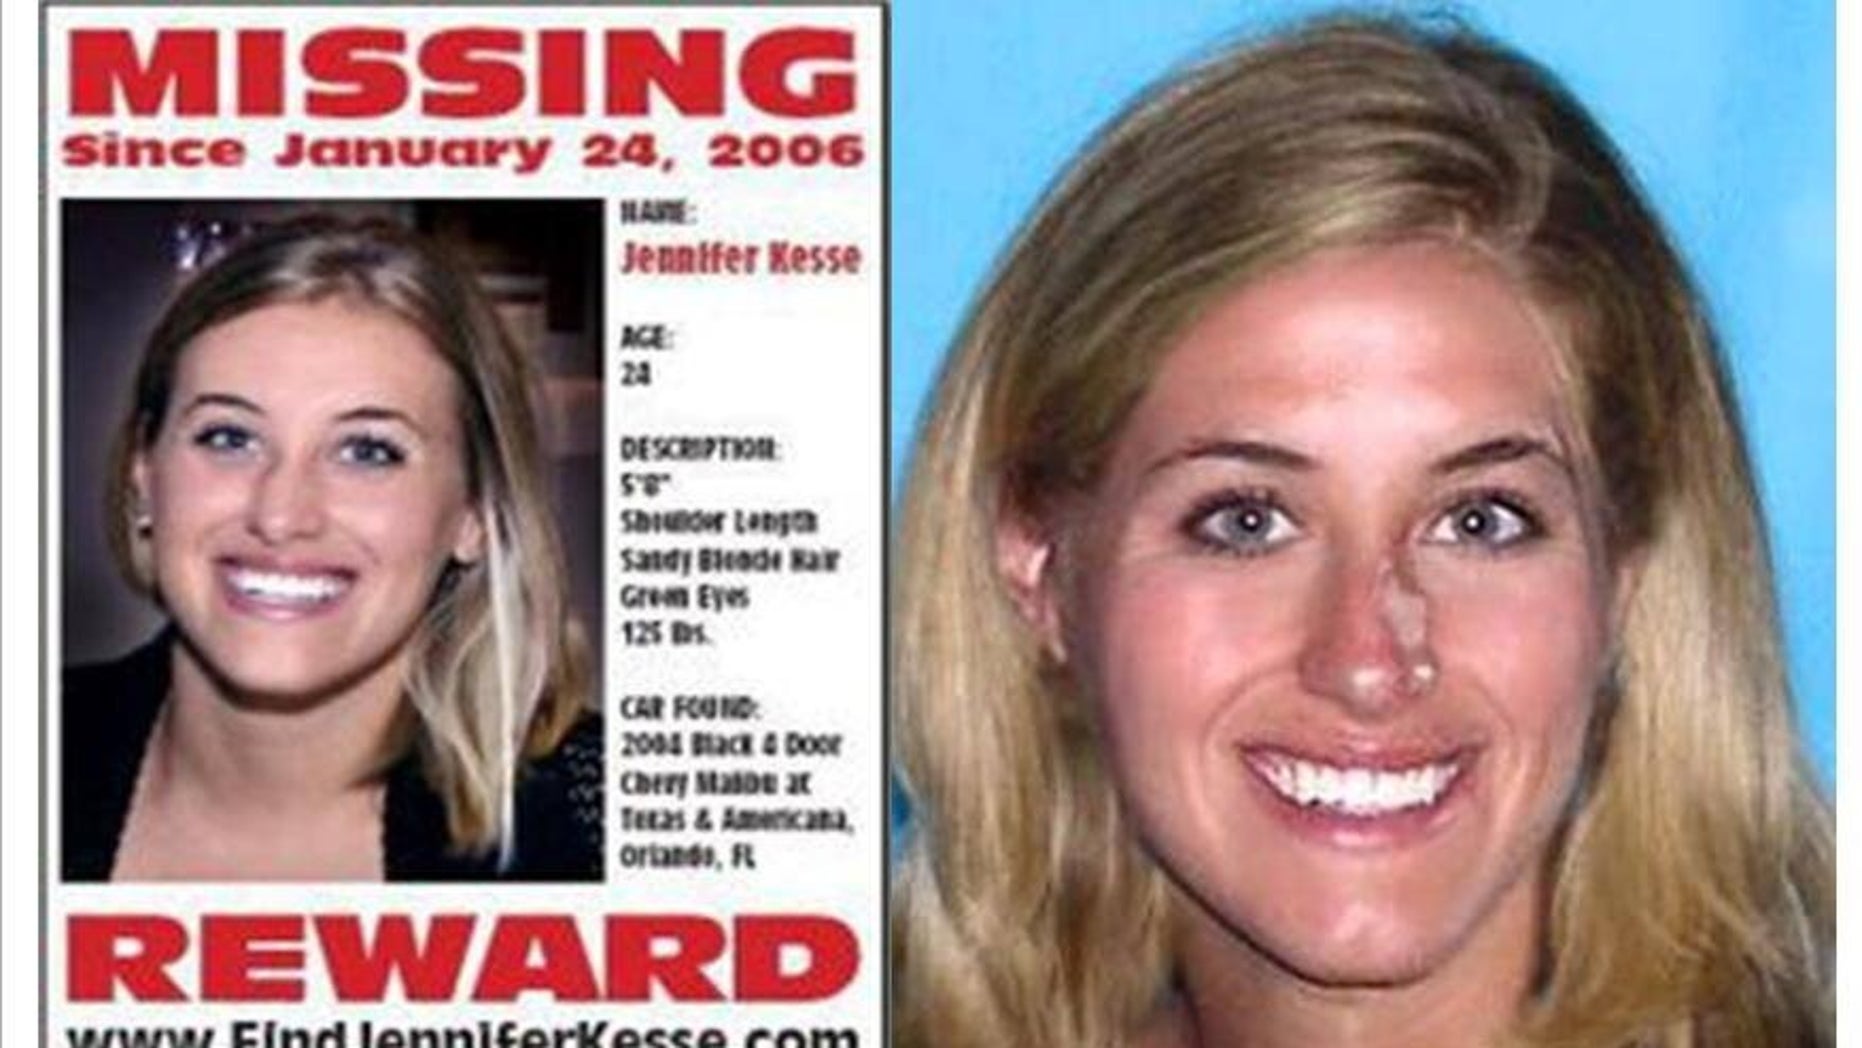 Family pleads for help 10 years after disappearance of Jennifer Kesse